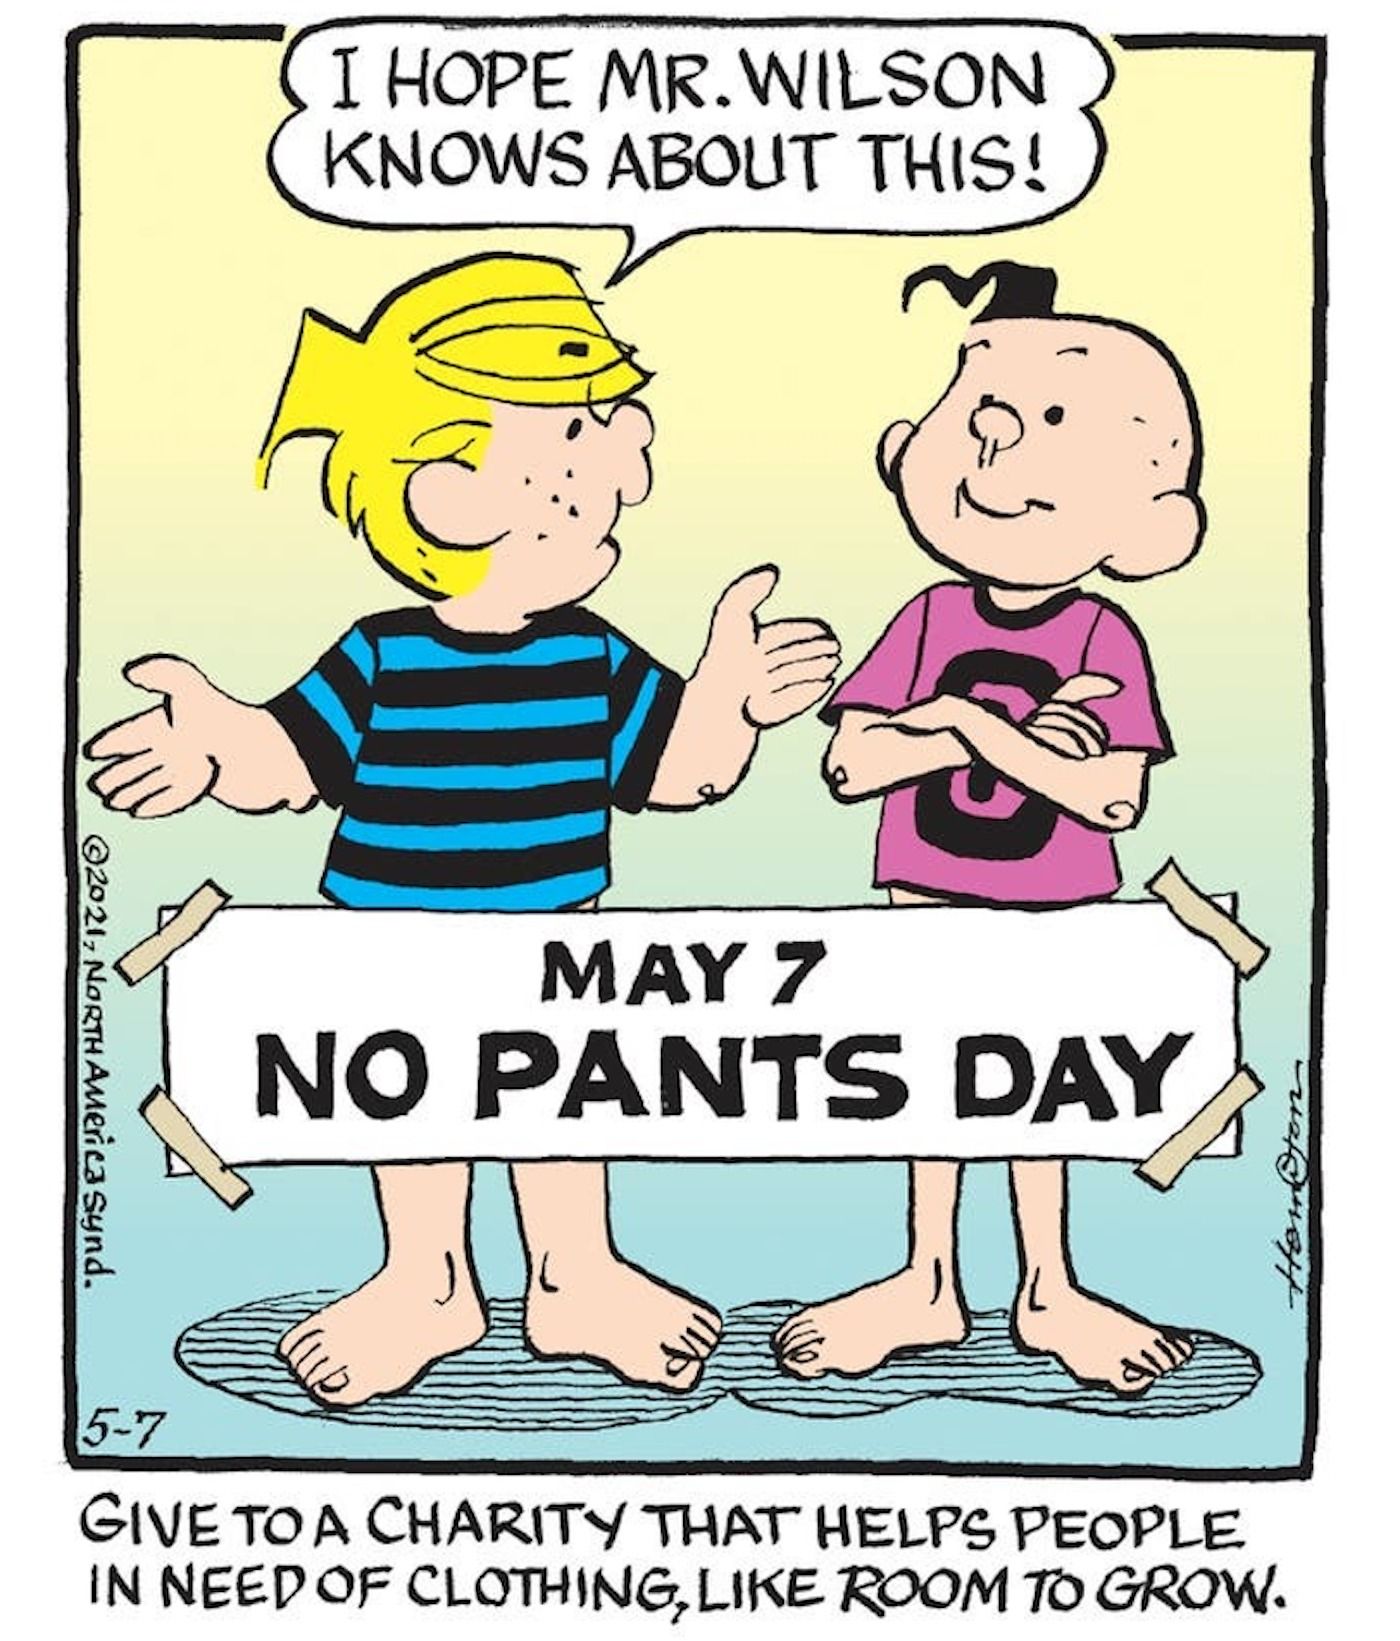 Comic Strip Characters Go Pants-Less To Help Clothe Those In Need